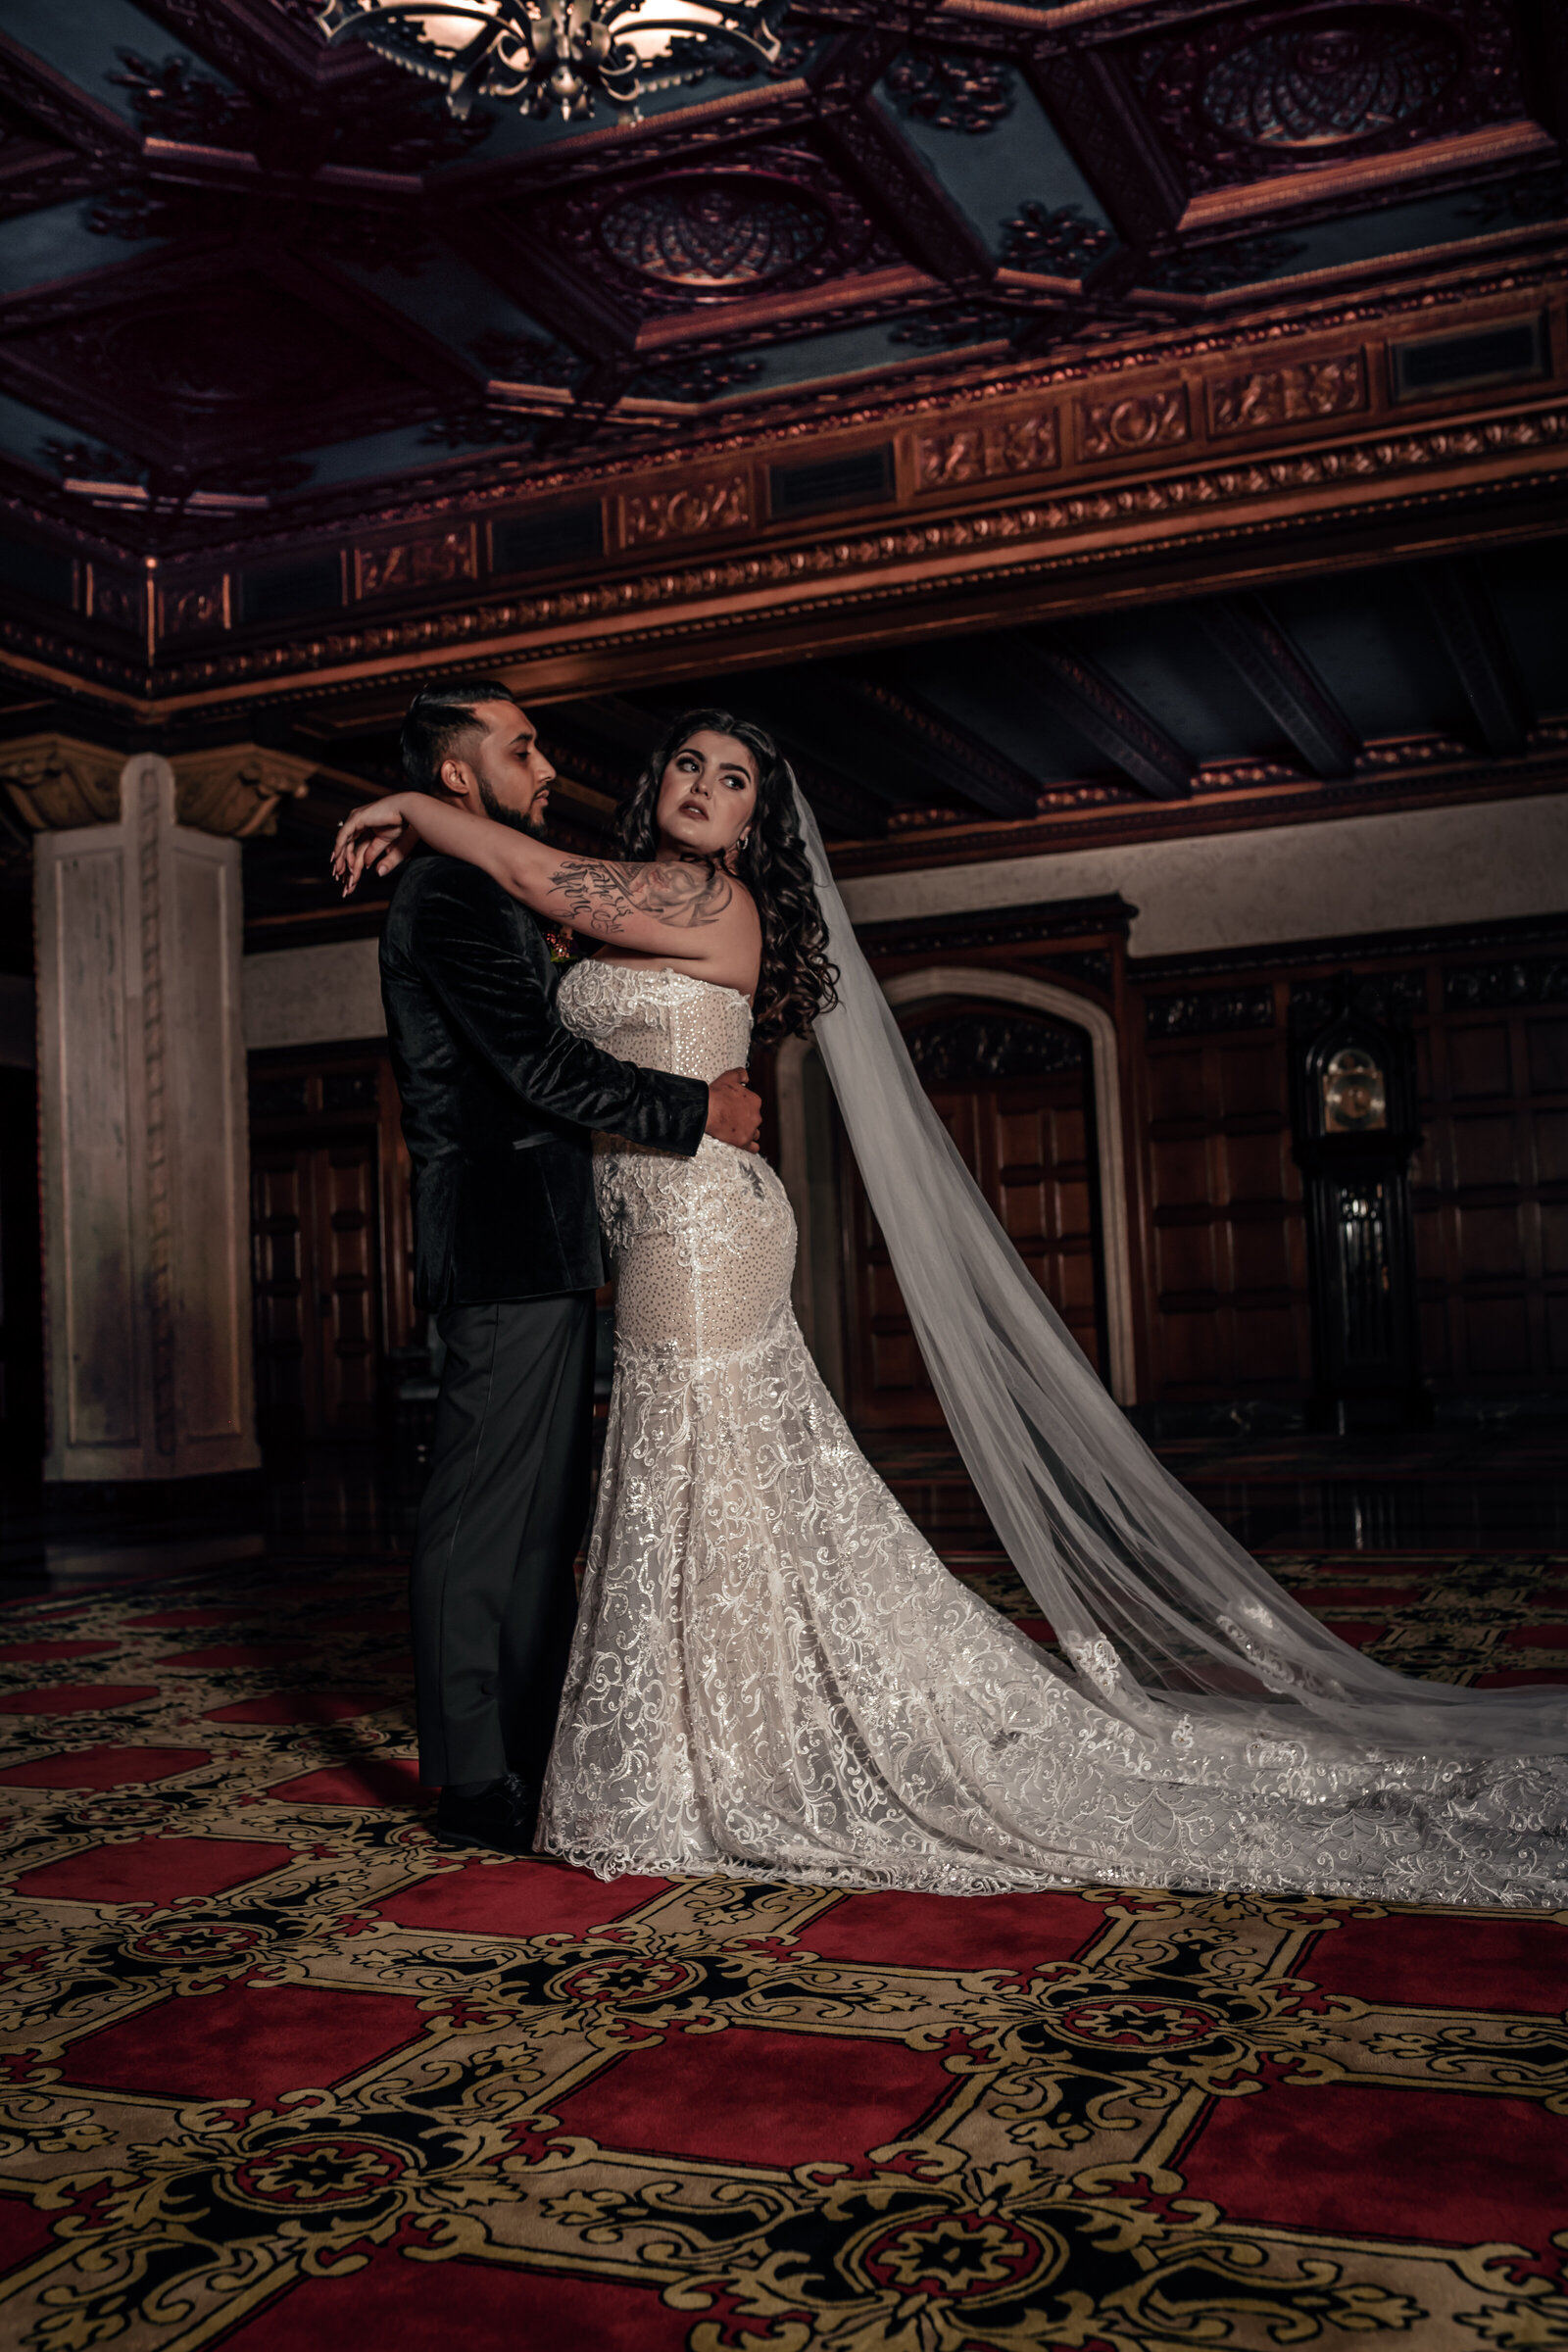 Wedding Photos at the Scottish Rite Cathedral in Indianapolis Indiana